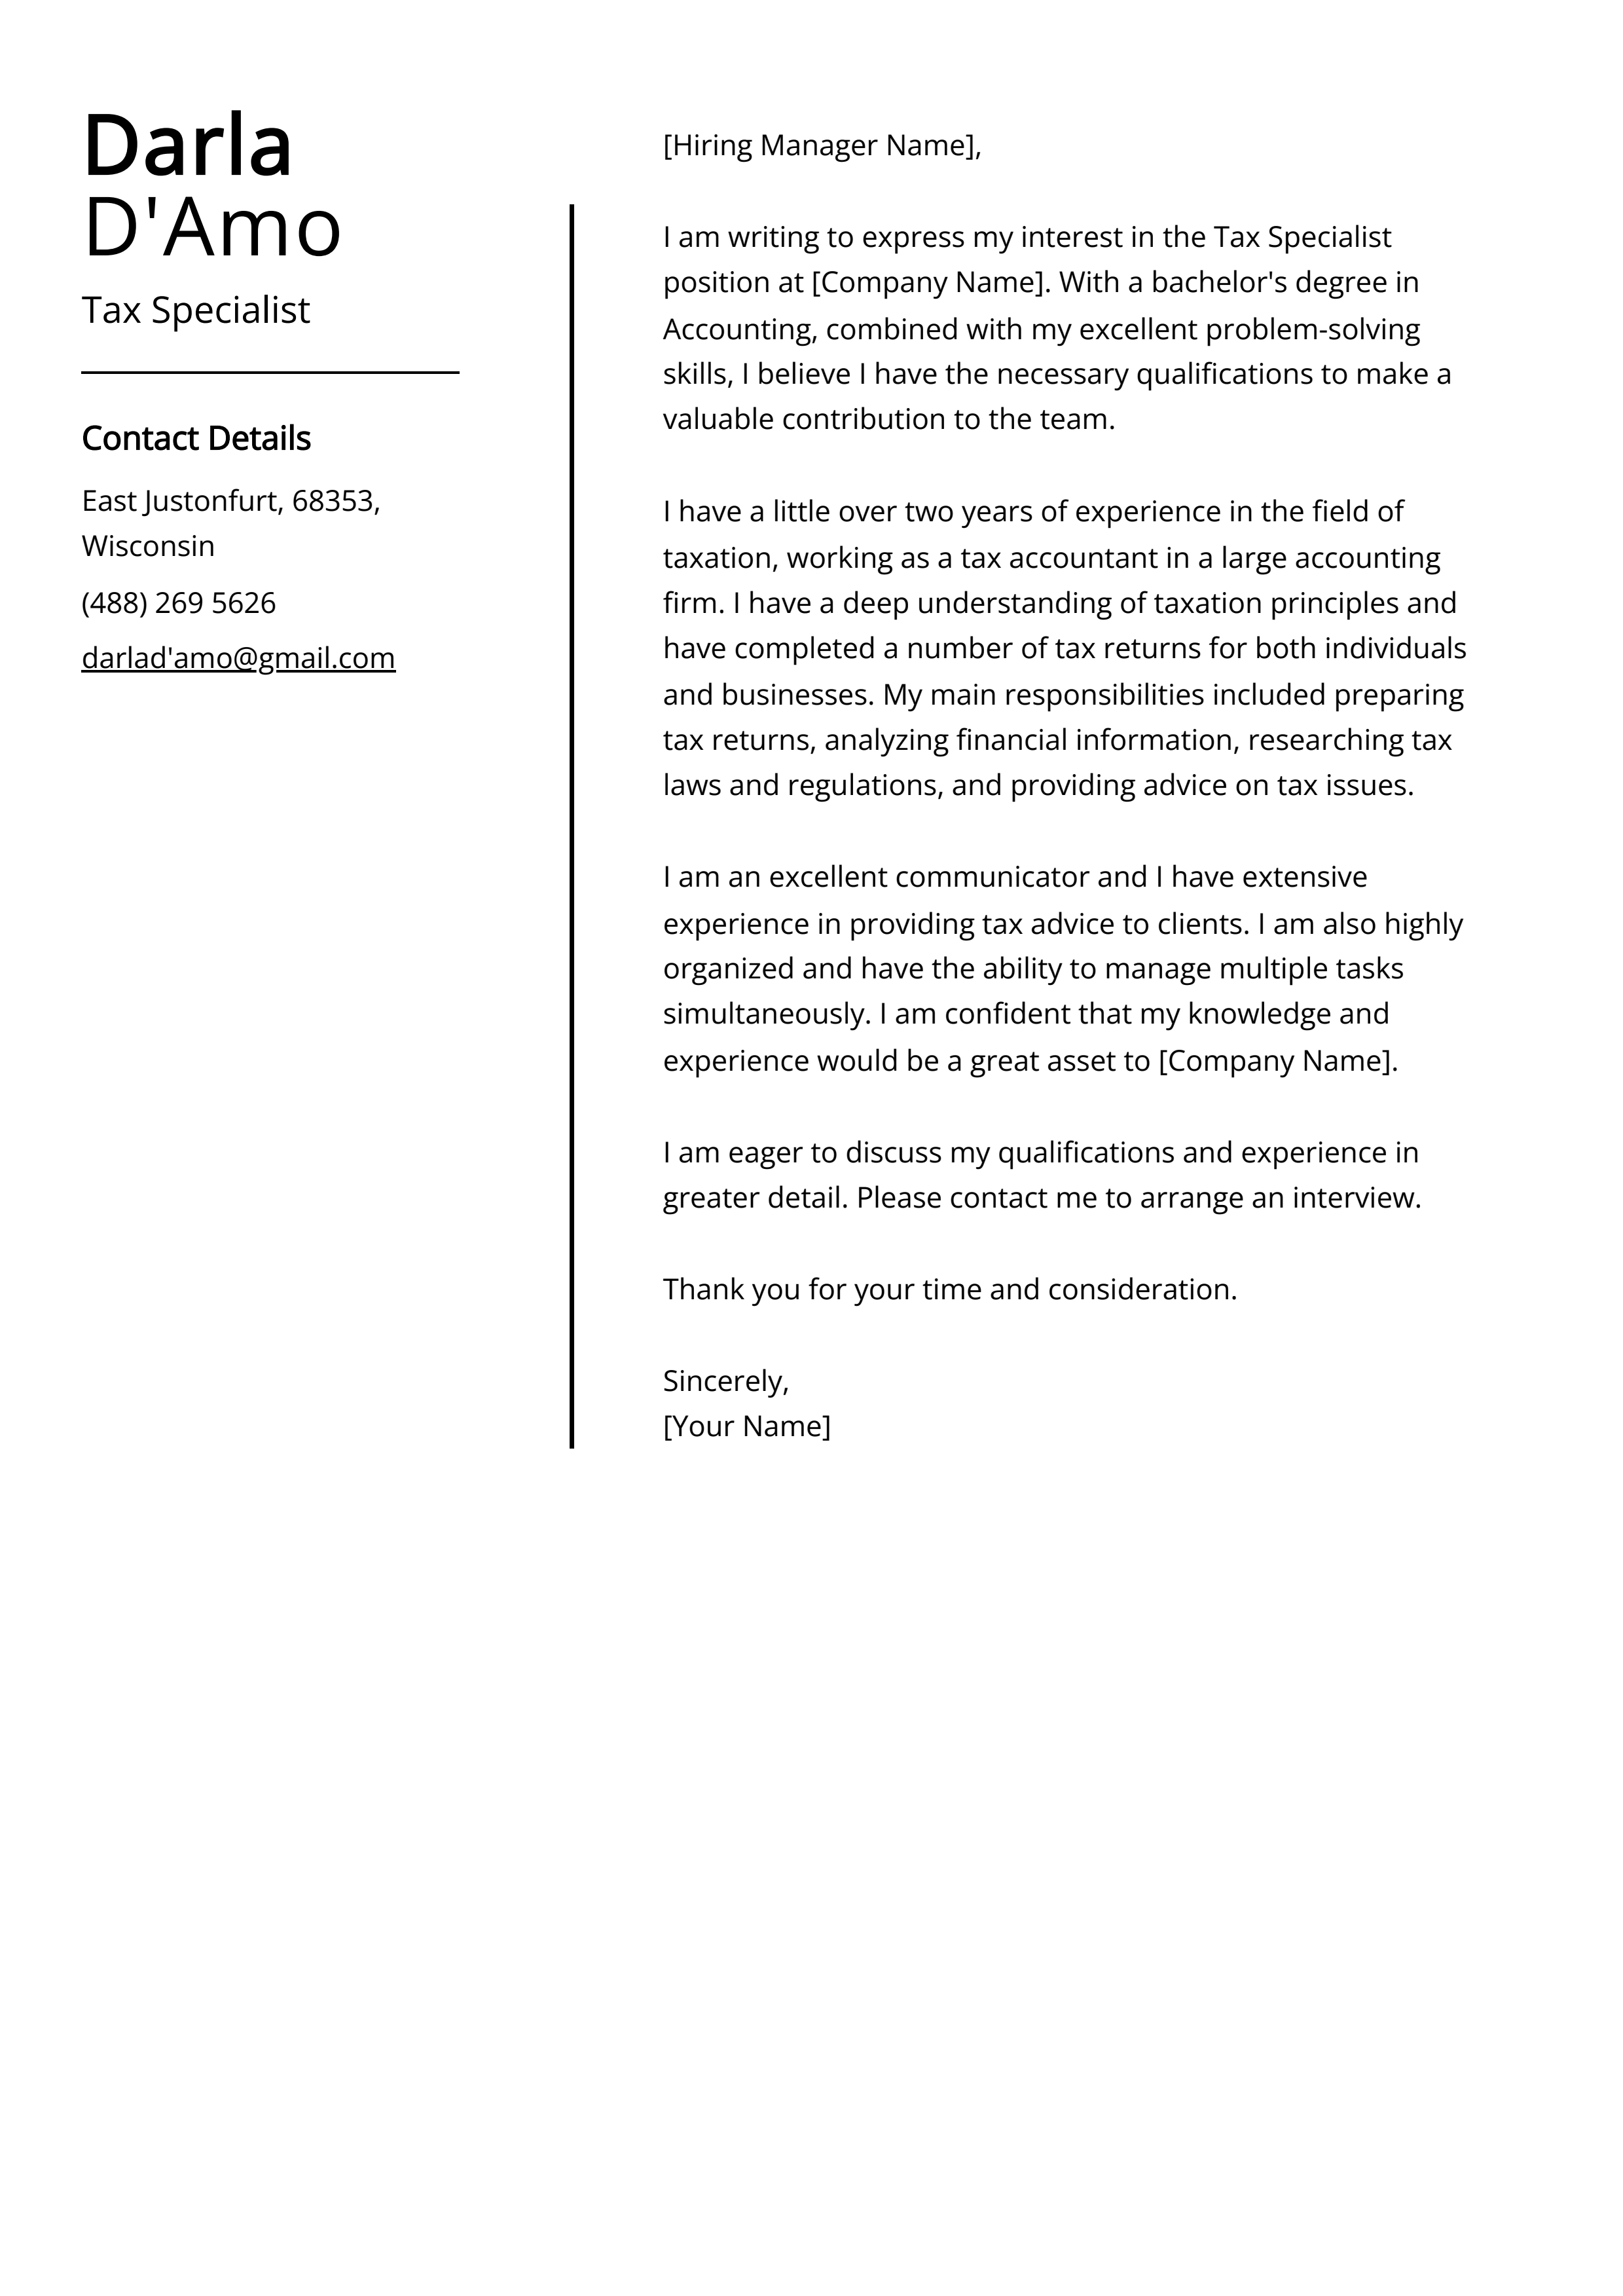 Tax Specialist Cover Letter Example